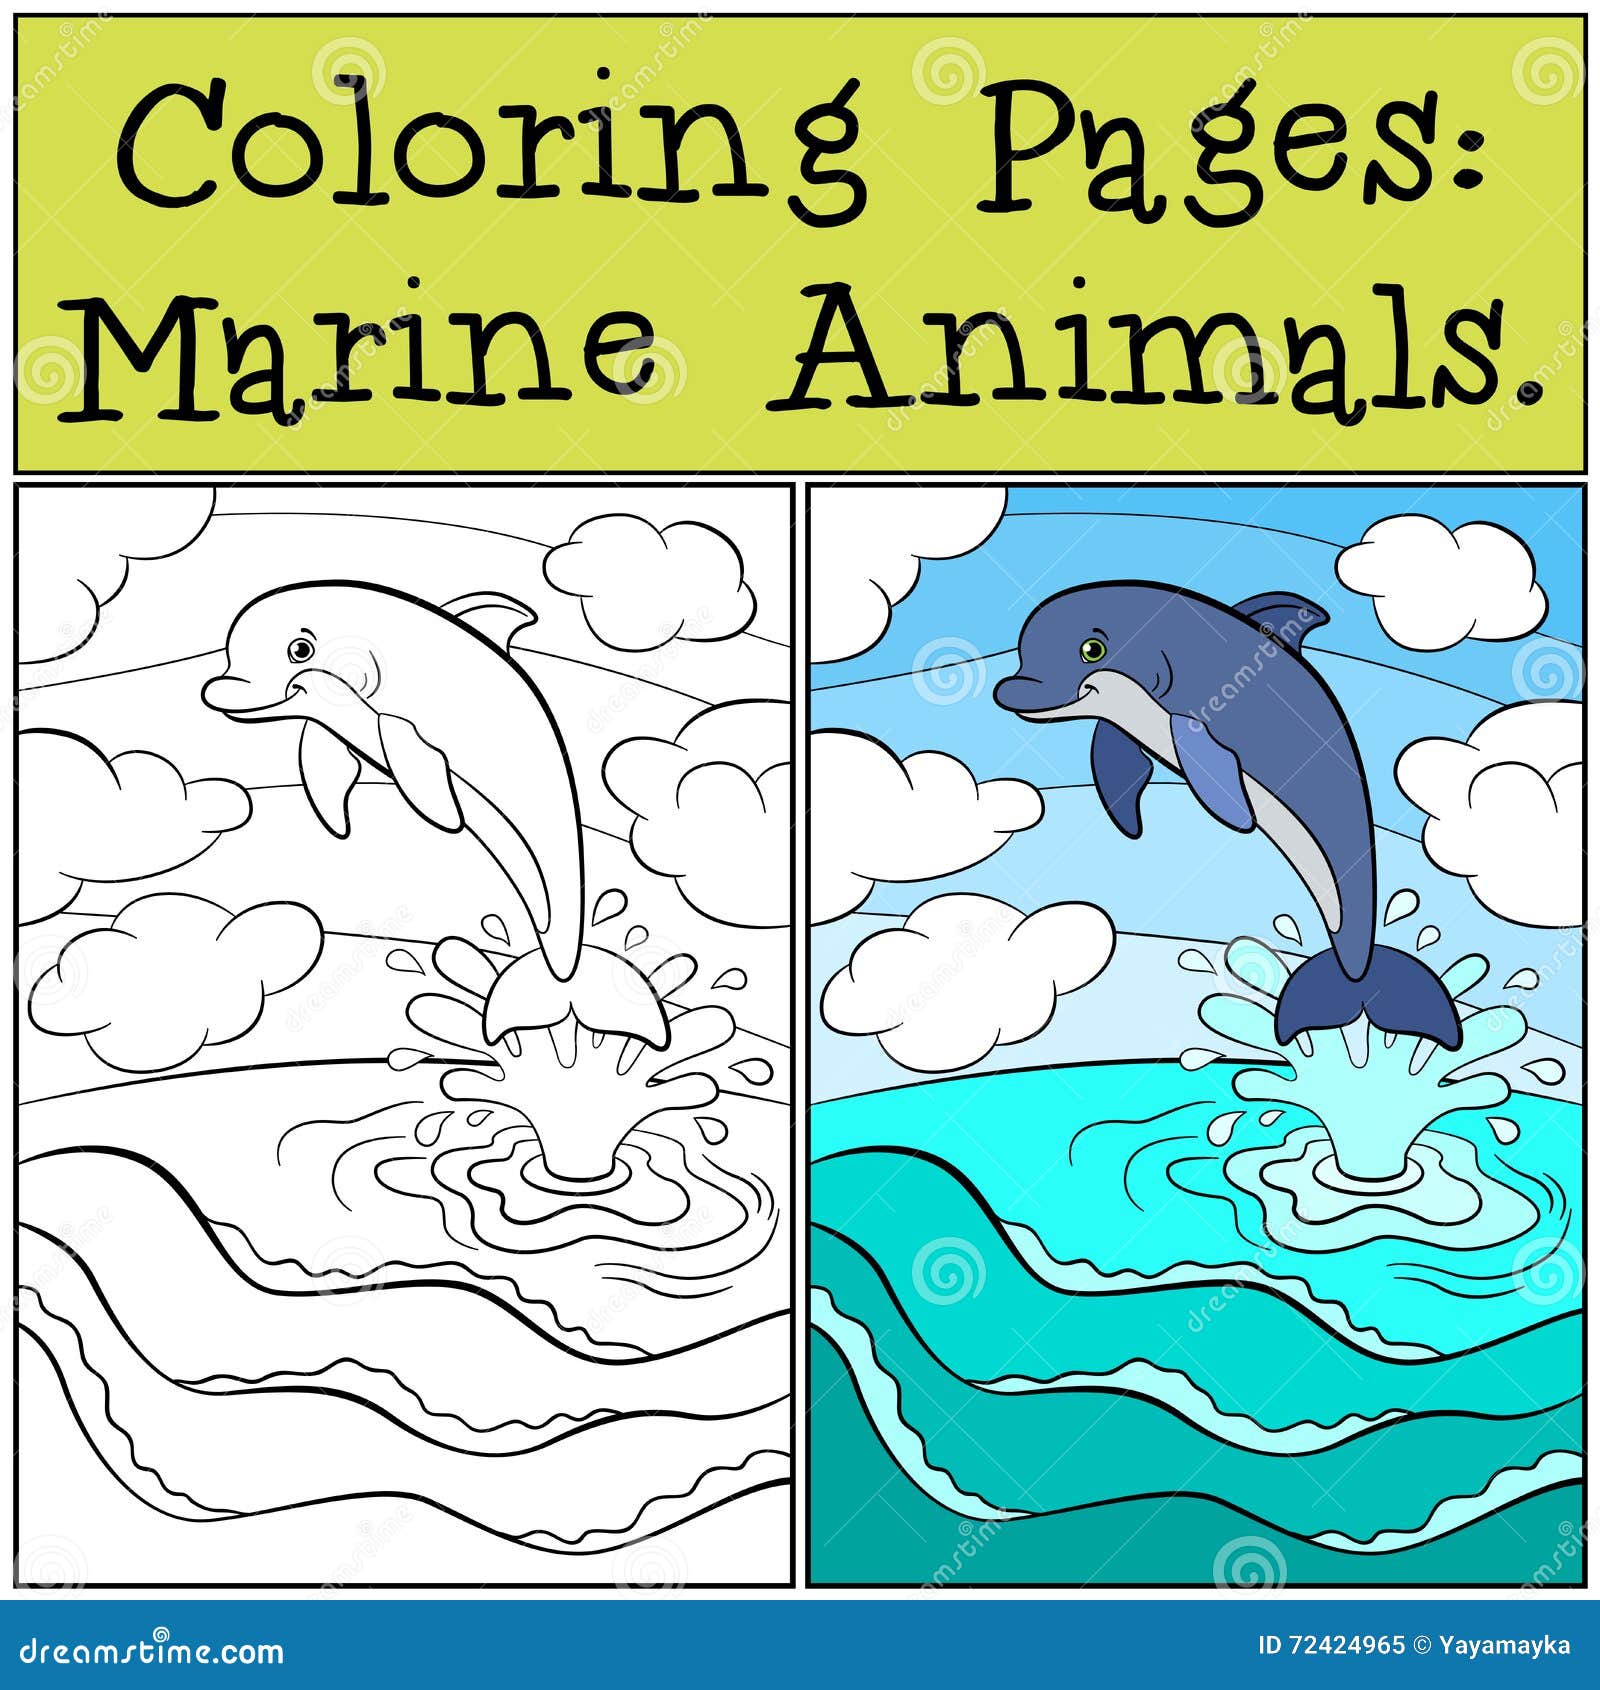 Coloring pages sea animals stock illustrations â coloring pages sea animals stock illustrations vectors clipart